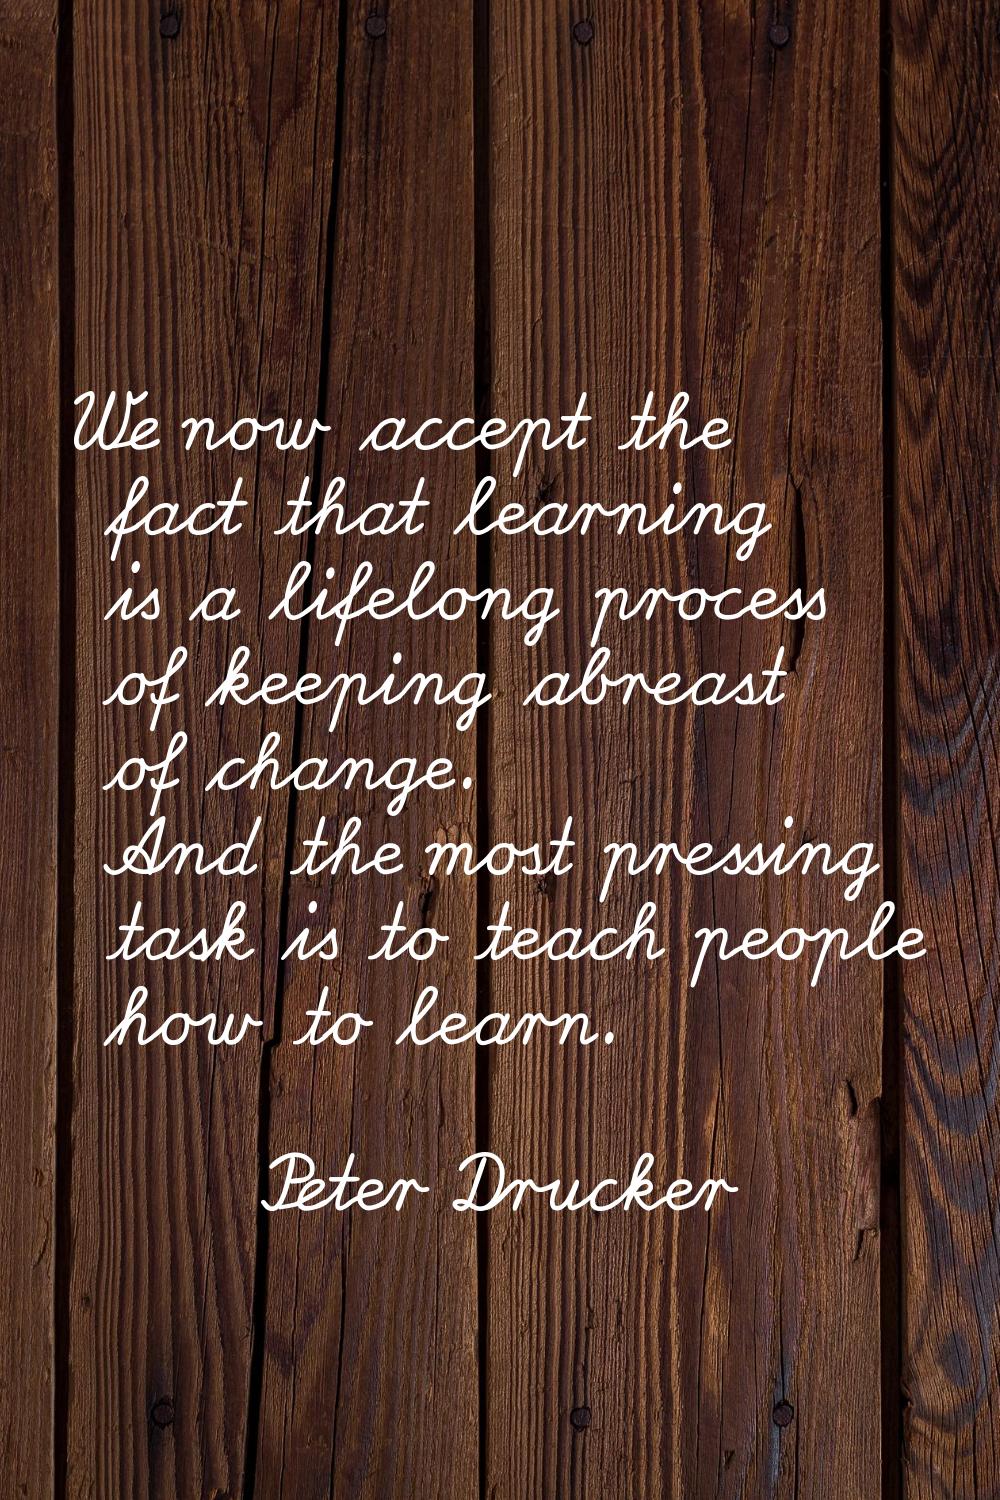 We now accept the fact that learning is a lifelong process of keeping abreast of change. And the mo